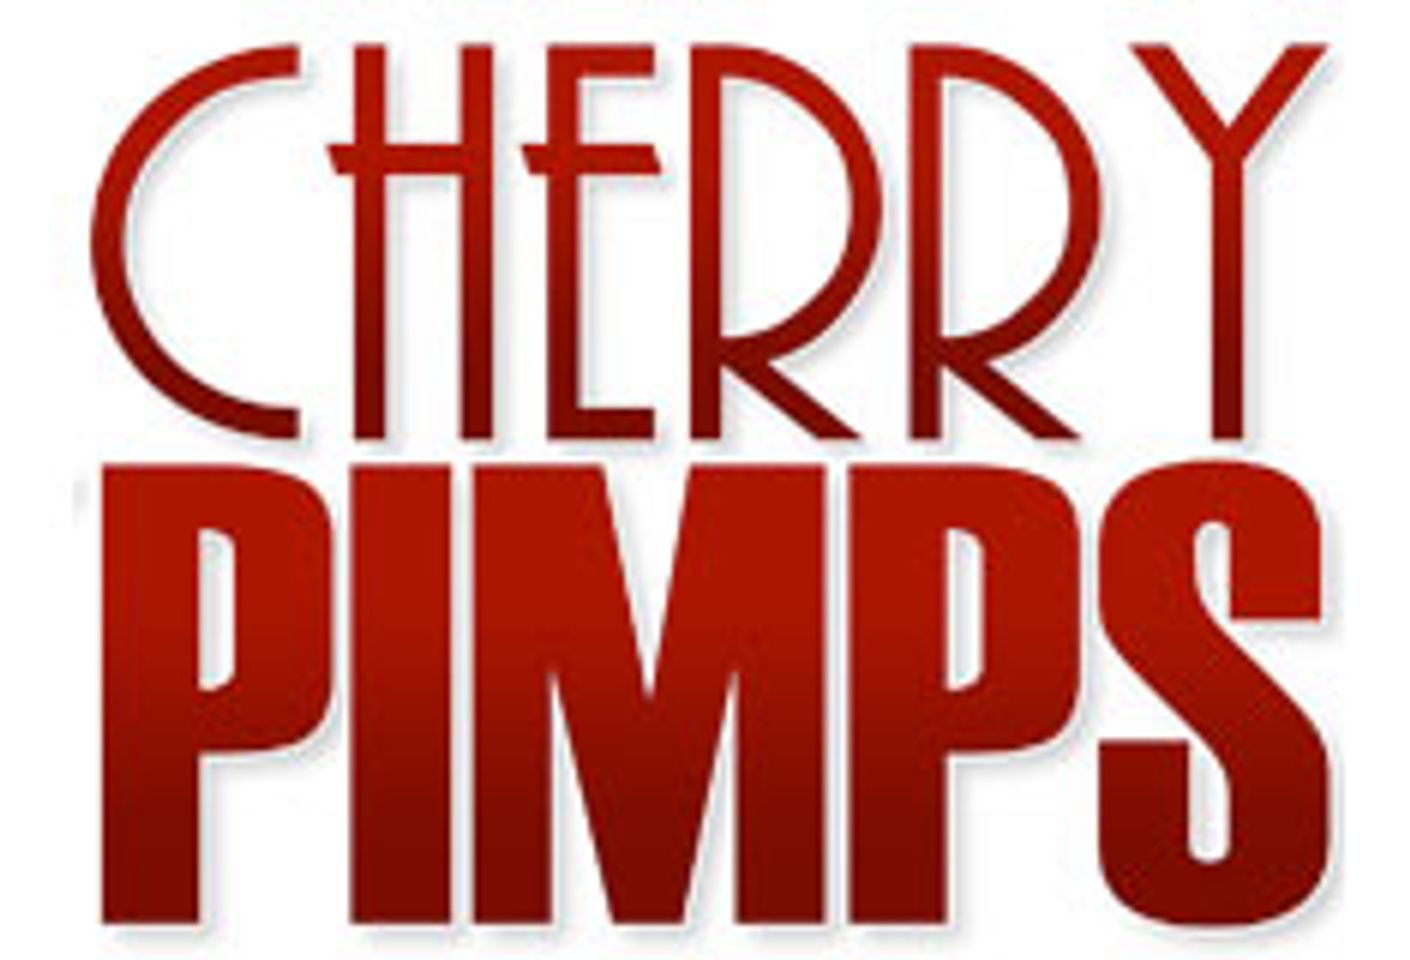 Caution When Hot: Abby Cross Leads a Five-Night Cherry Pimps Lineup